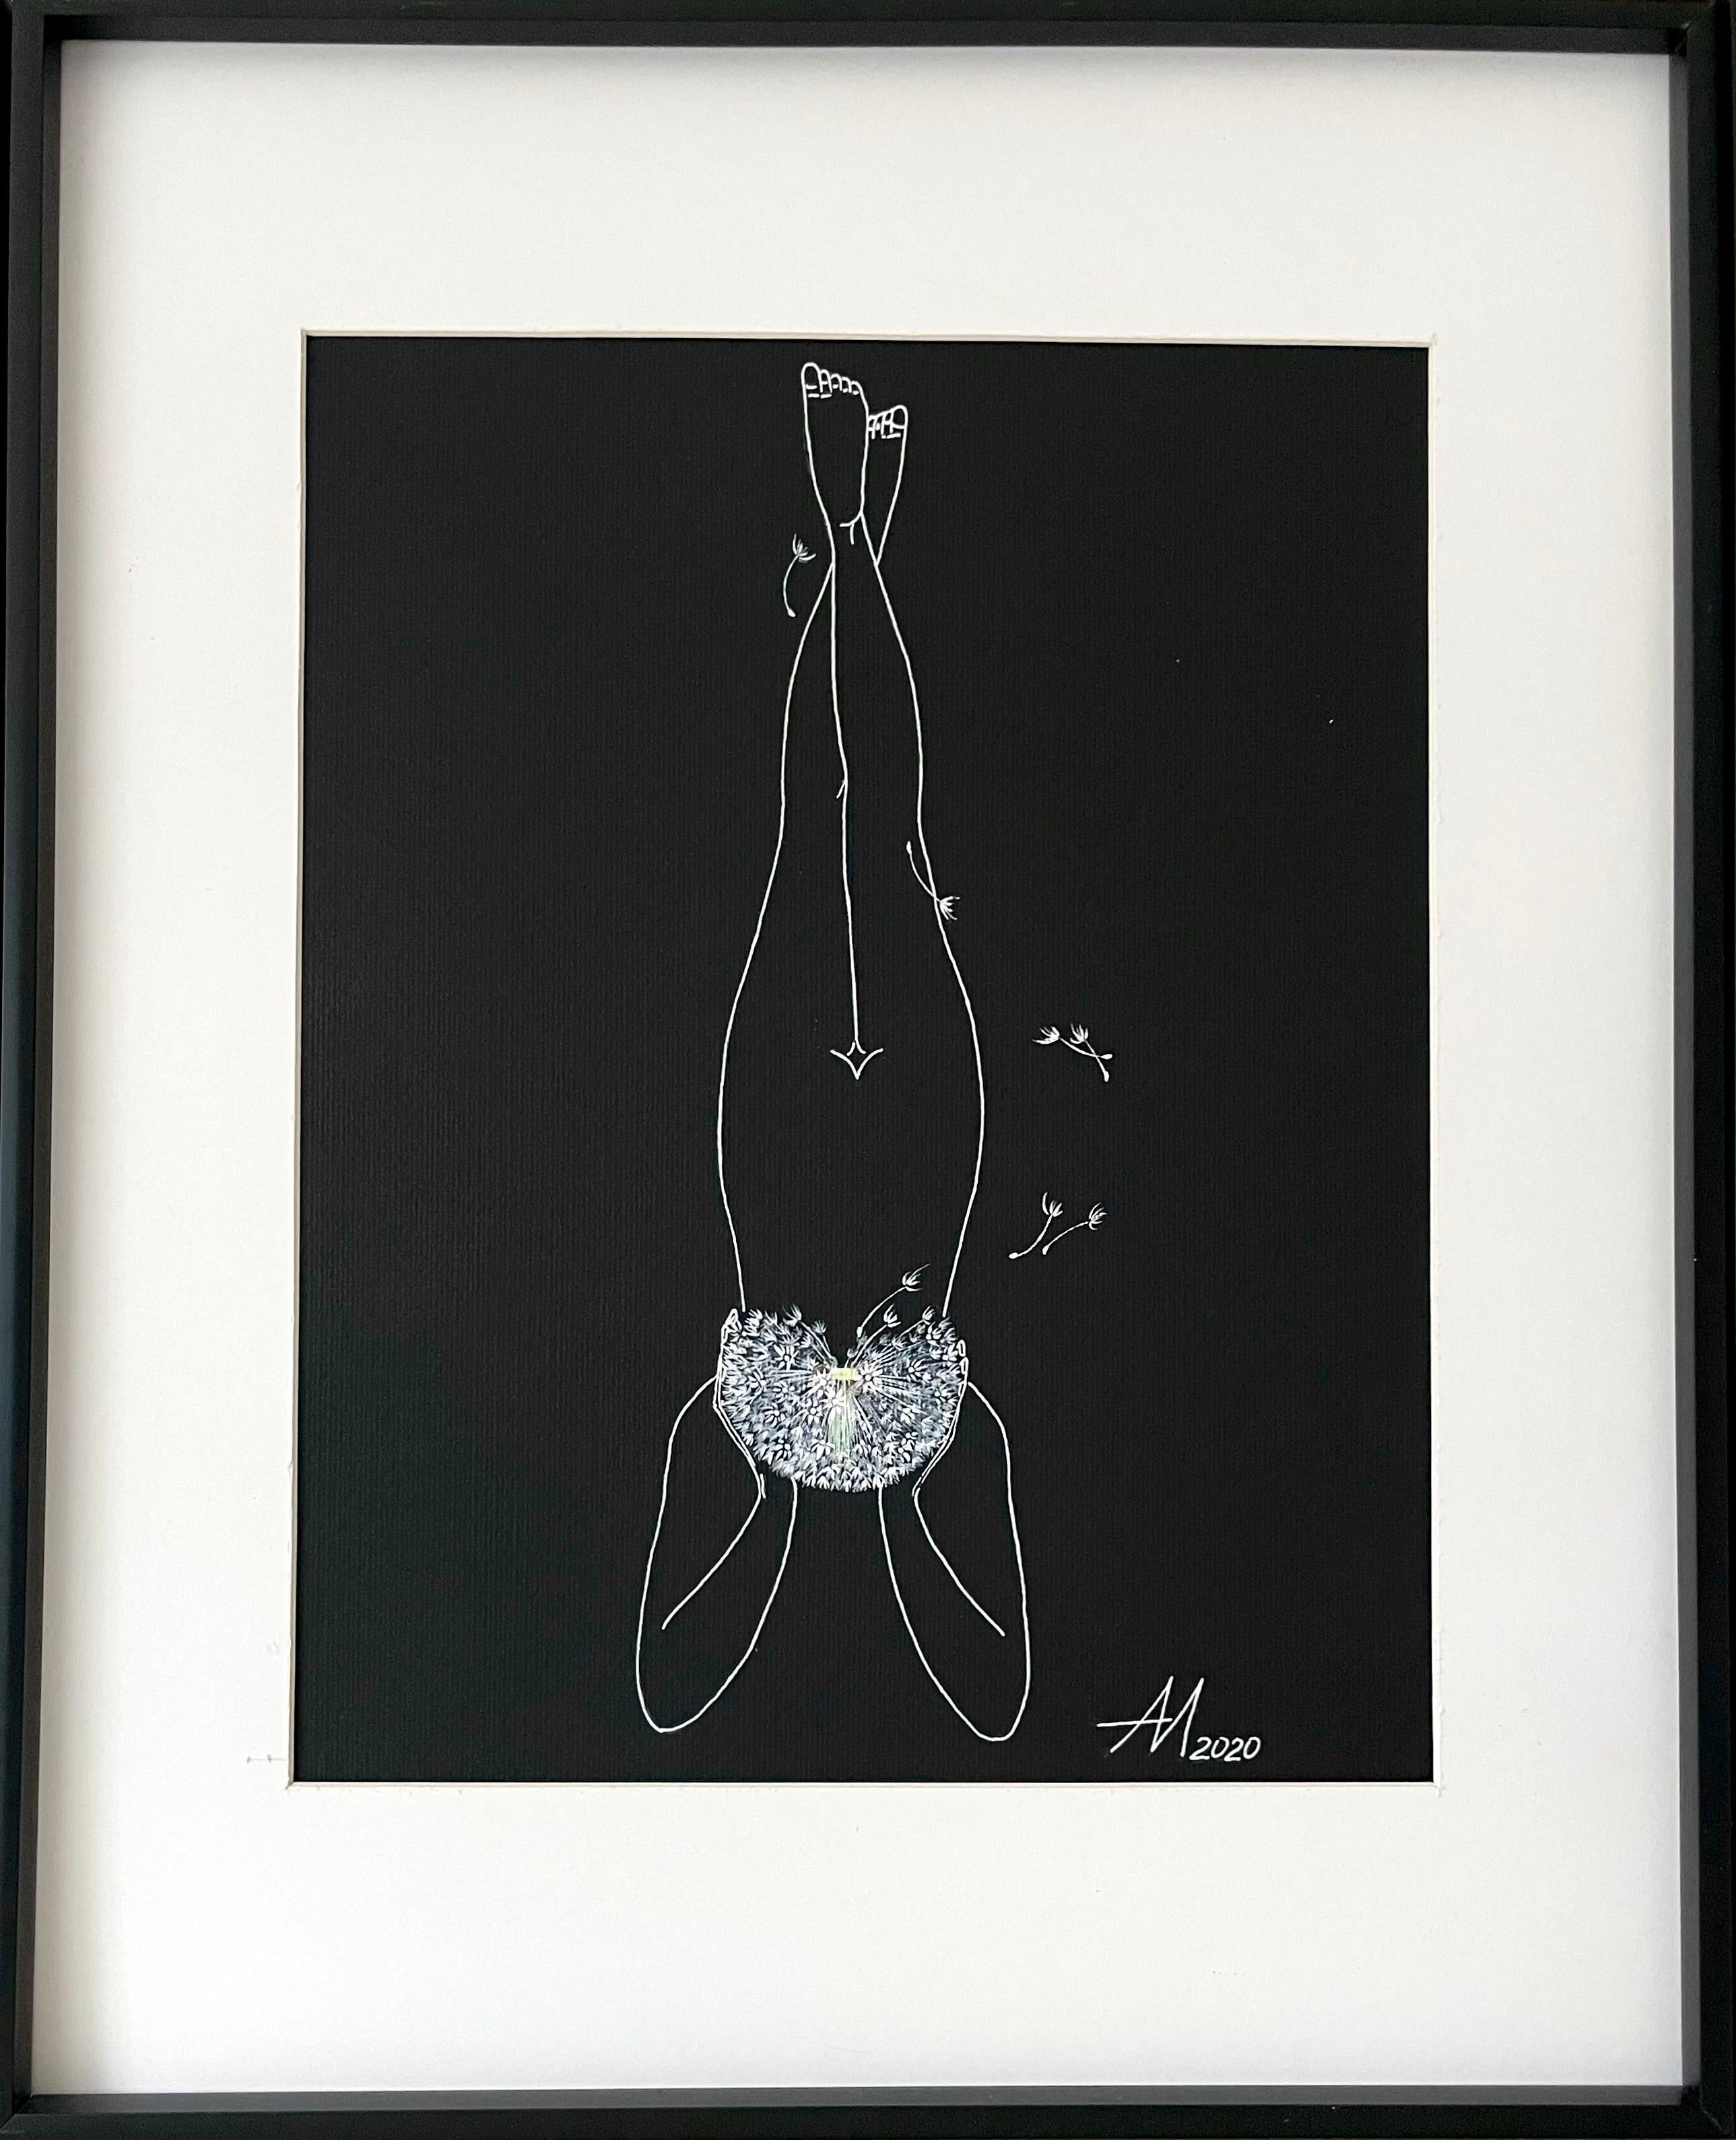 Thoughts - line drawing woman figure with white dandelions - Black Abstract Drawing by Mila Akopova